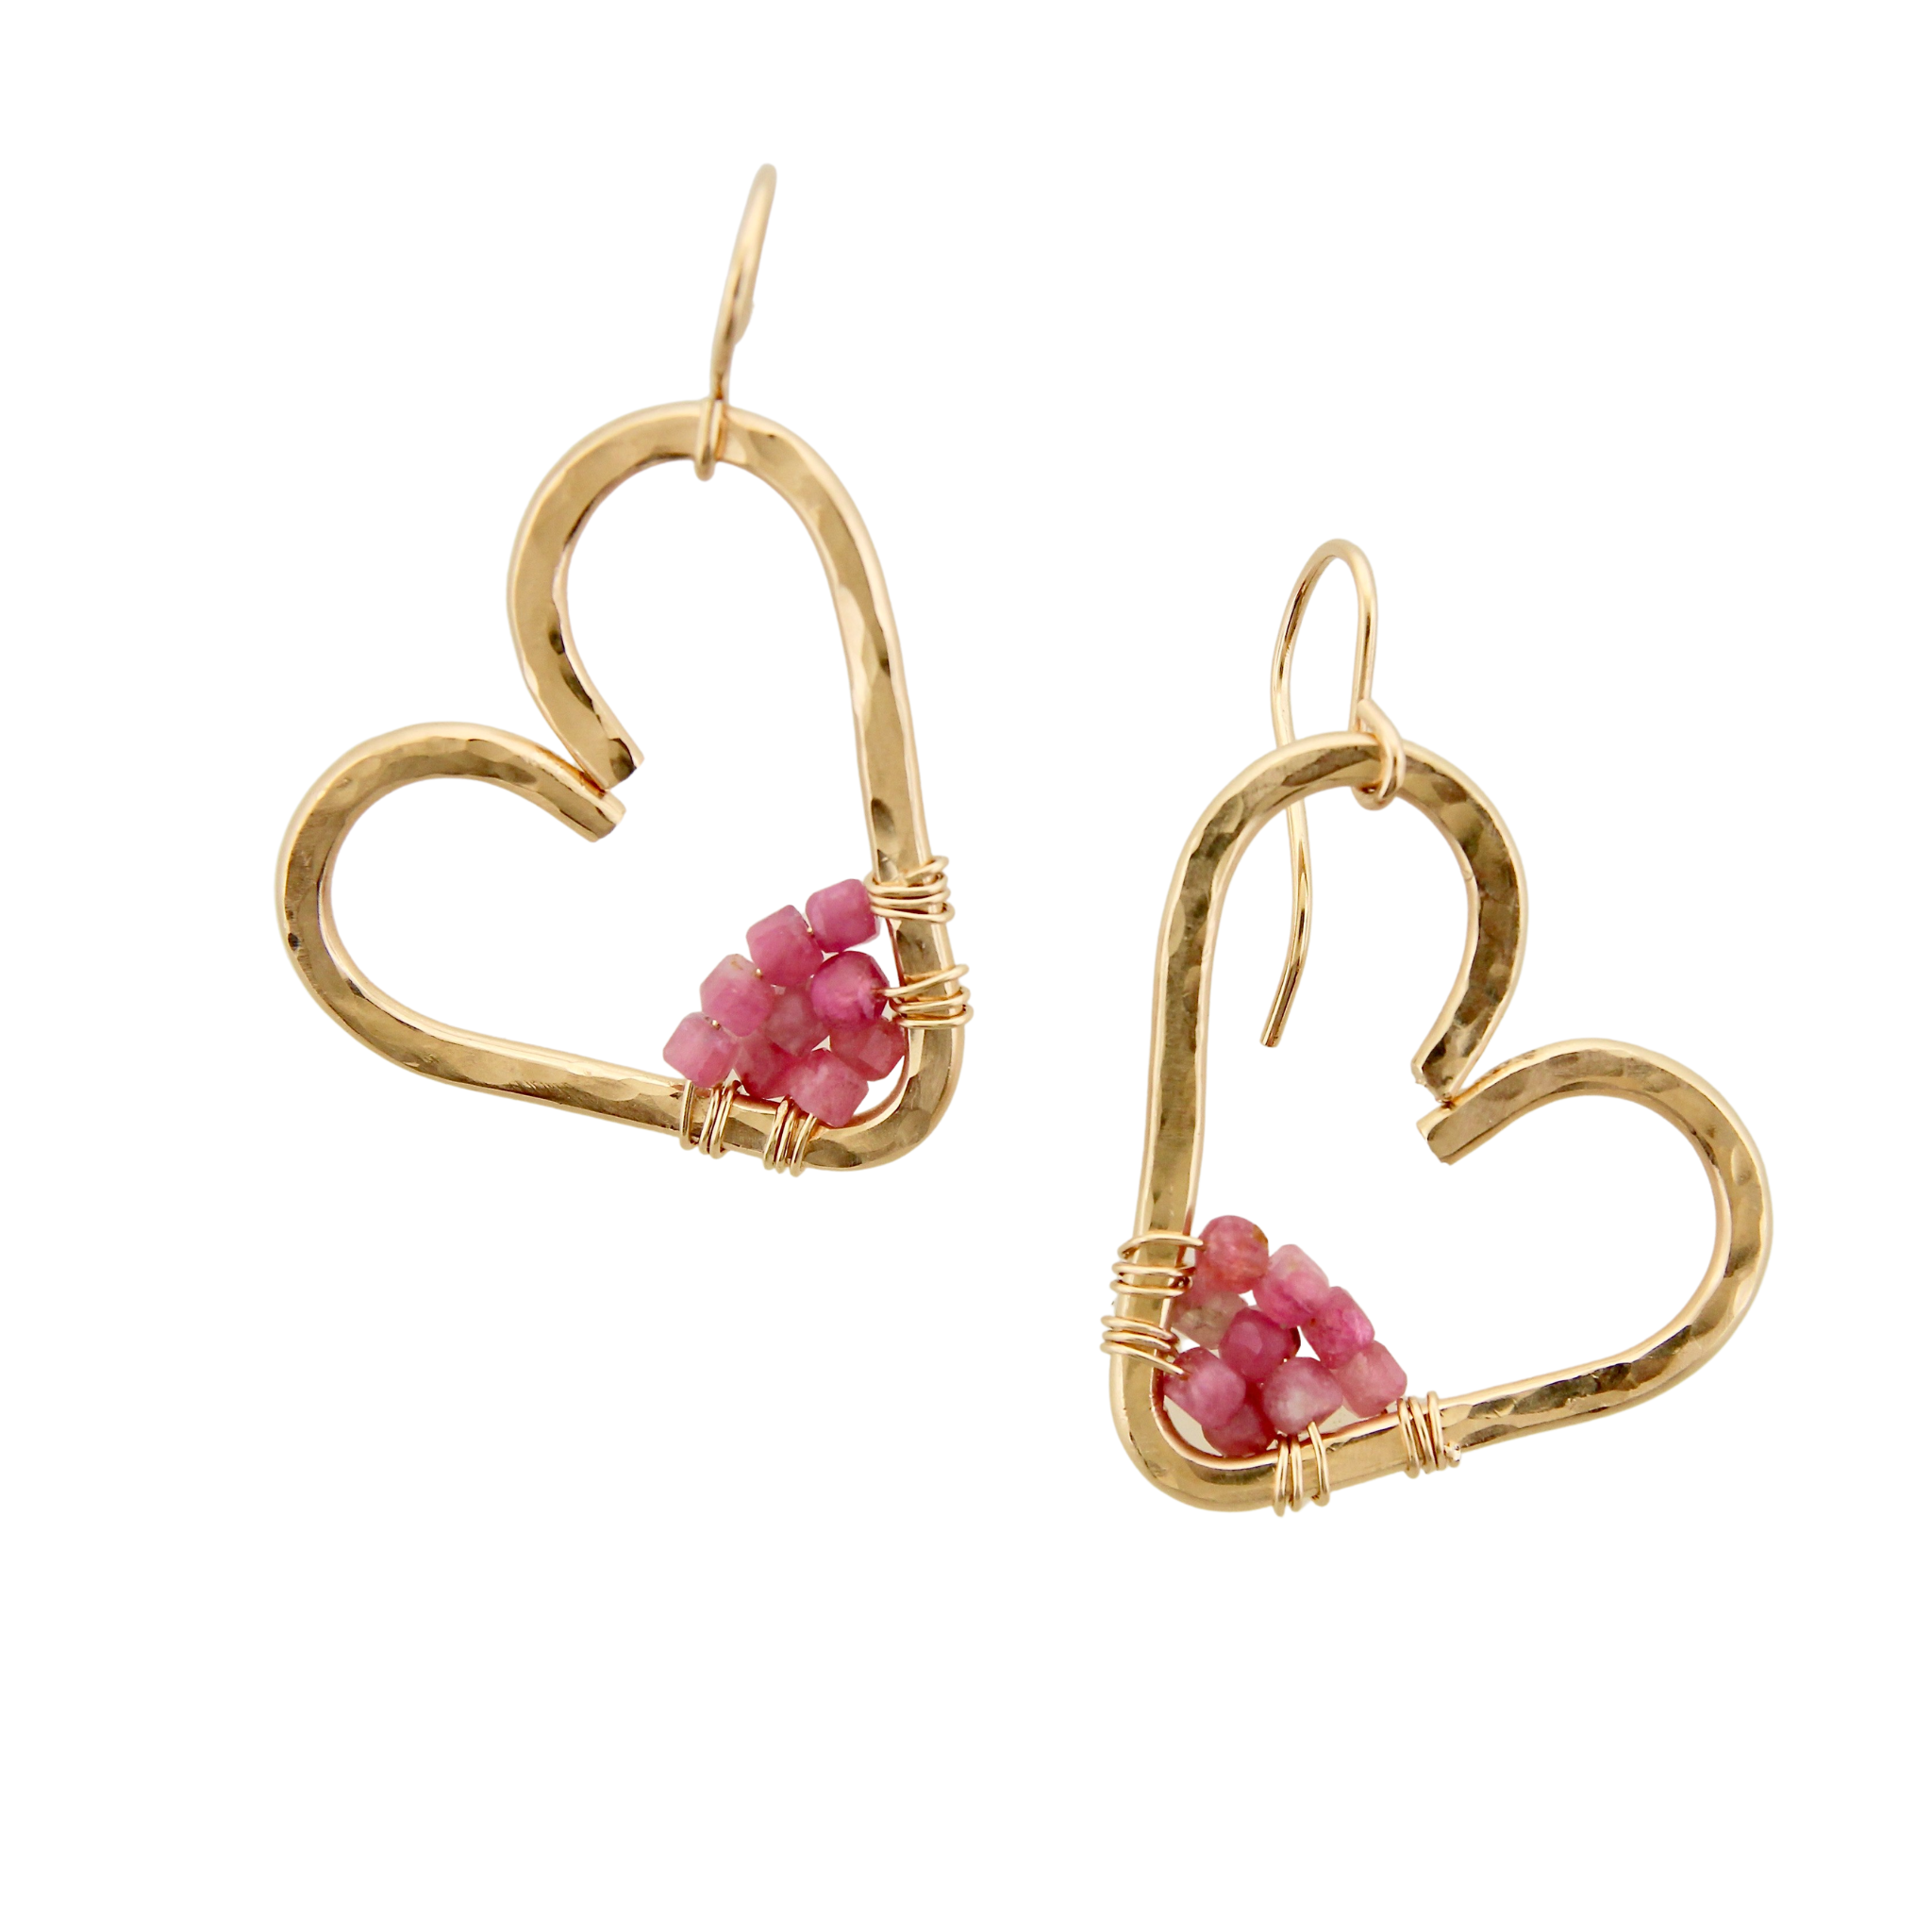 Hammered Heart Earrings - Small Pink Tourmaline